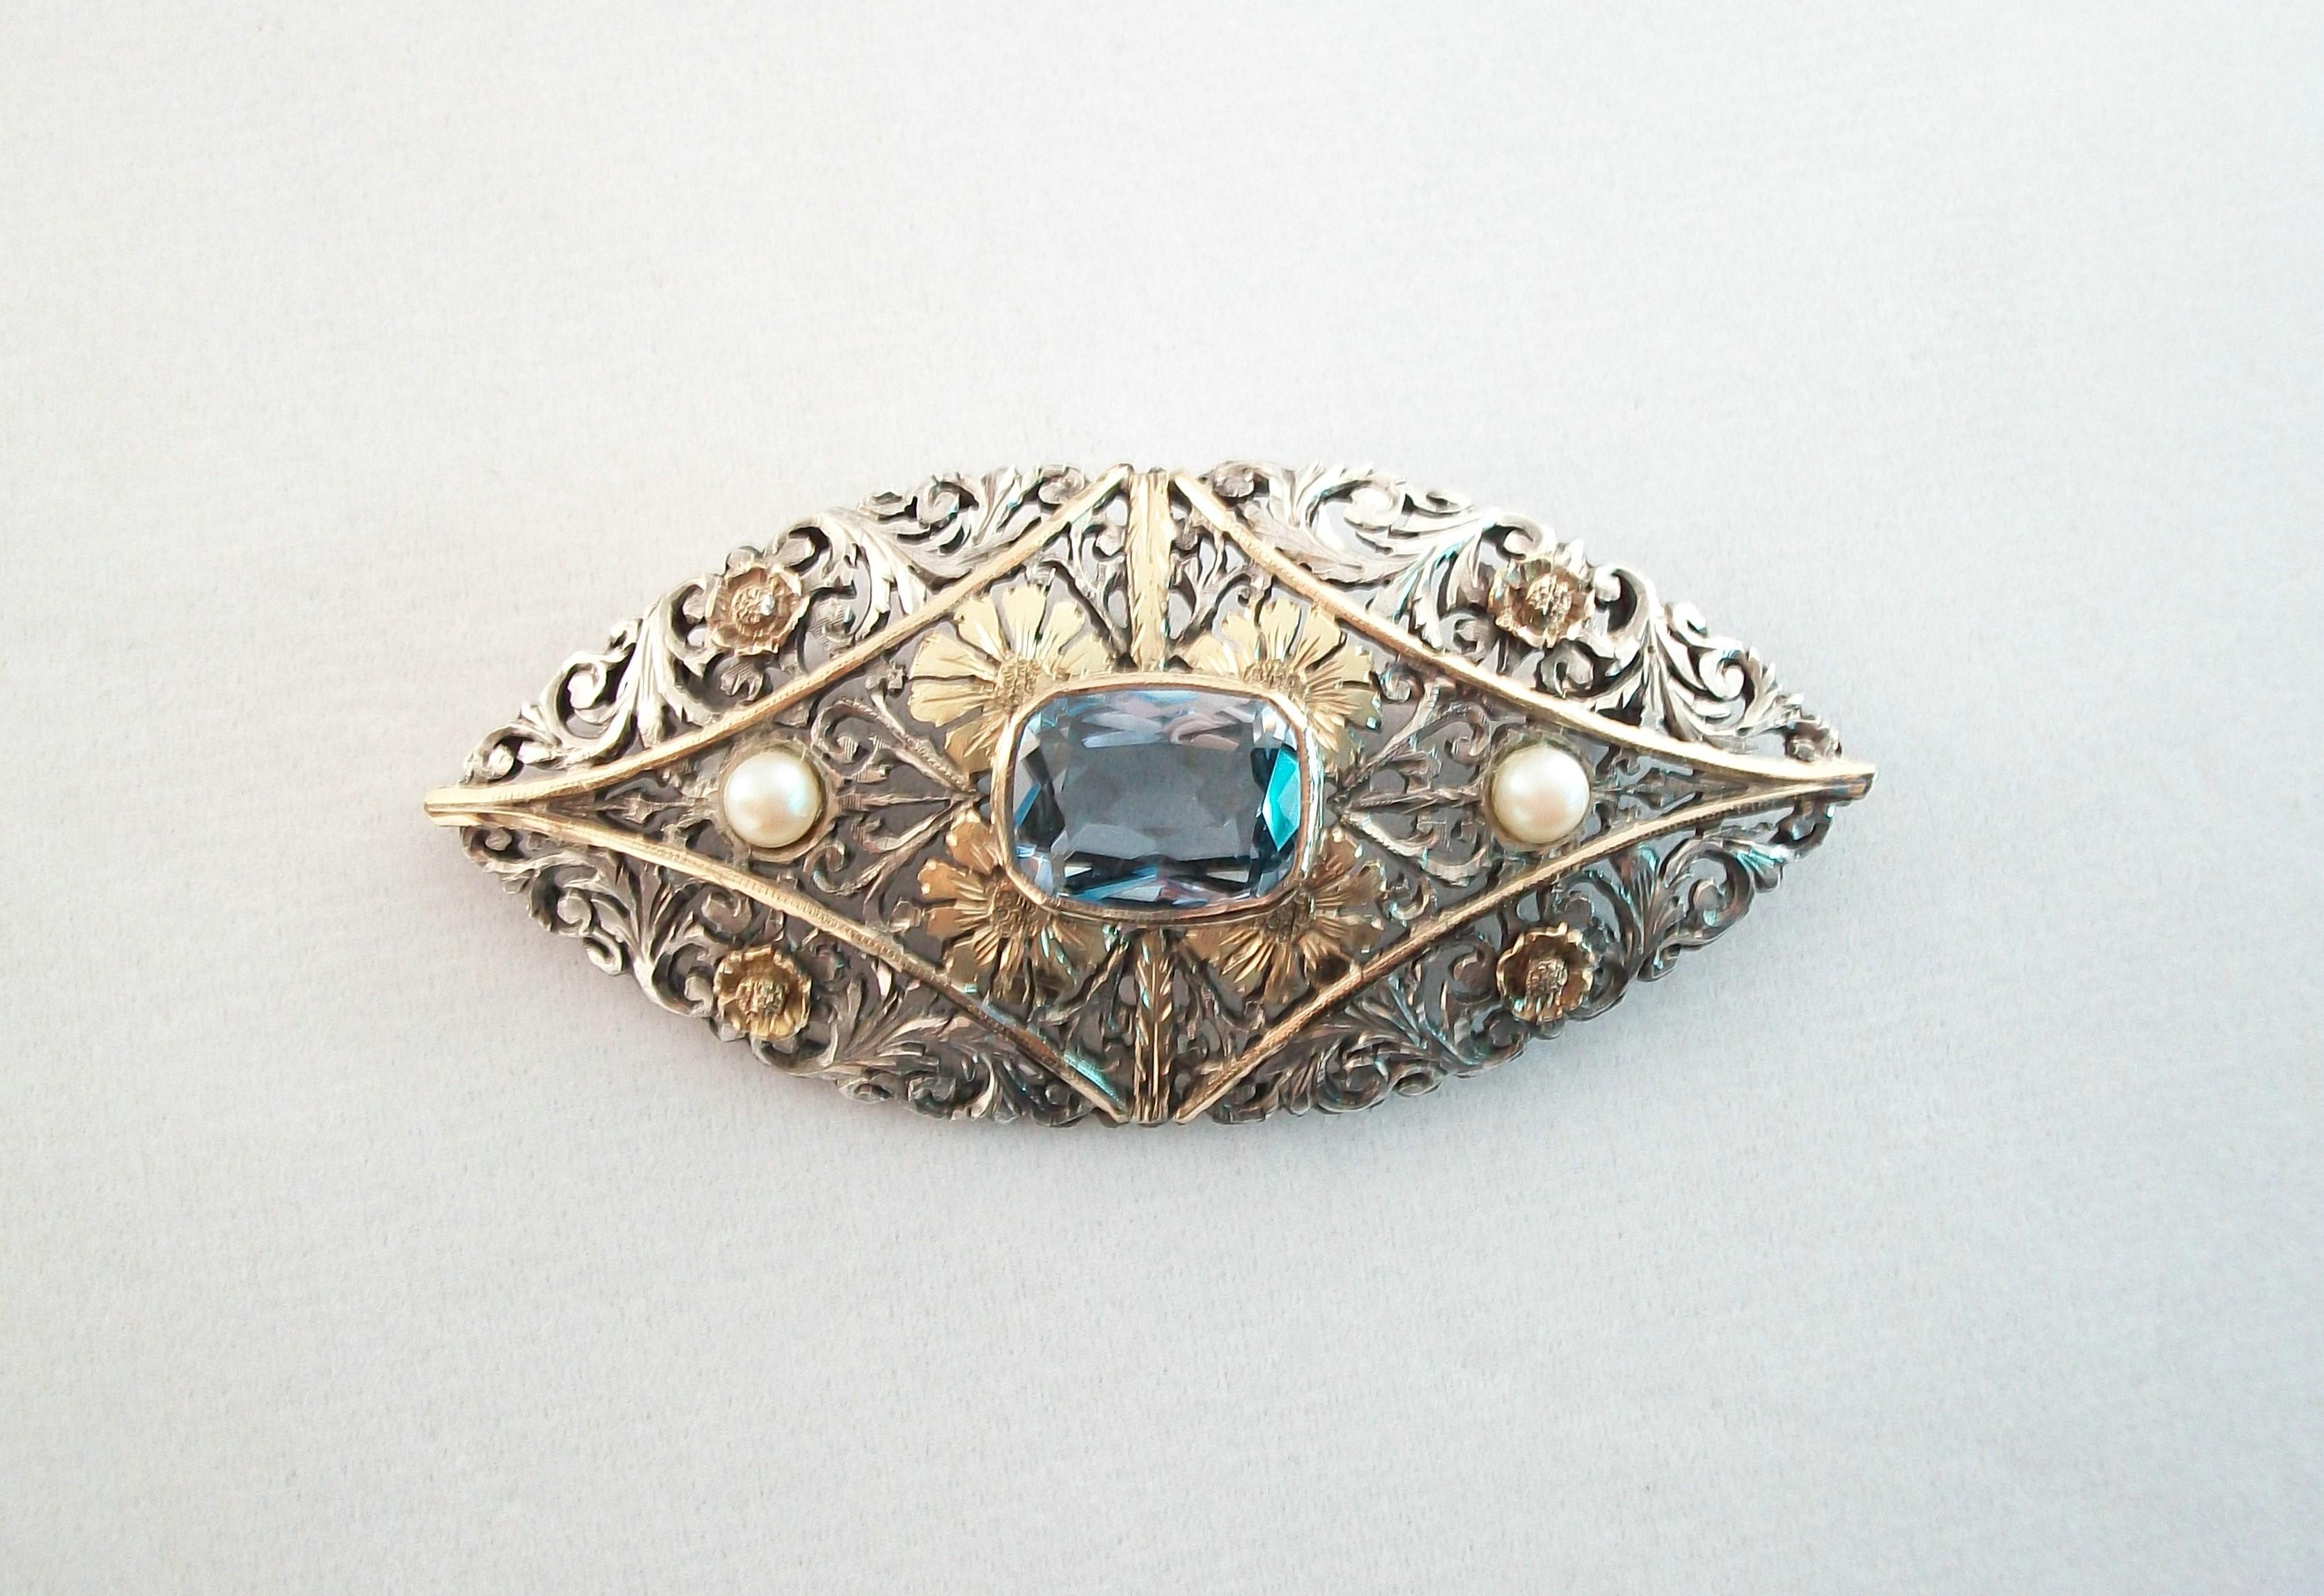 Art Nouveau Aquamarine & Pearl Brooch Set in Silver & Gold - France - Circa 1900 For Sale 5